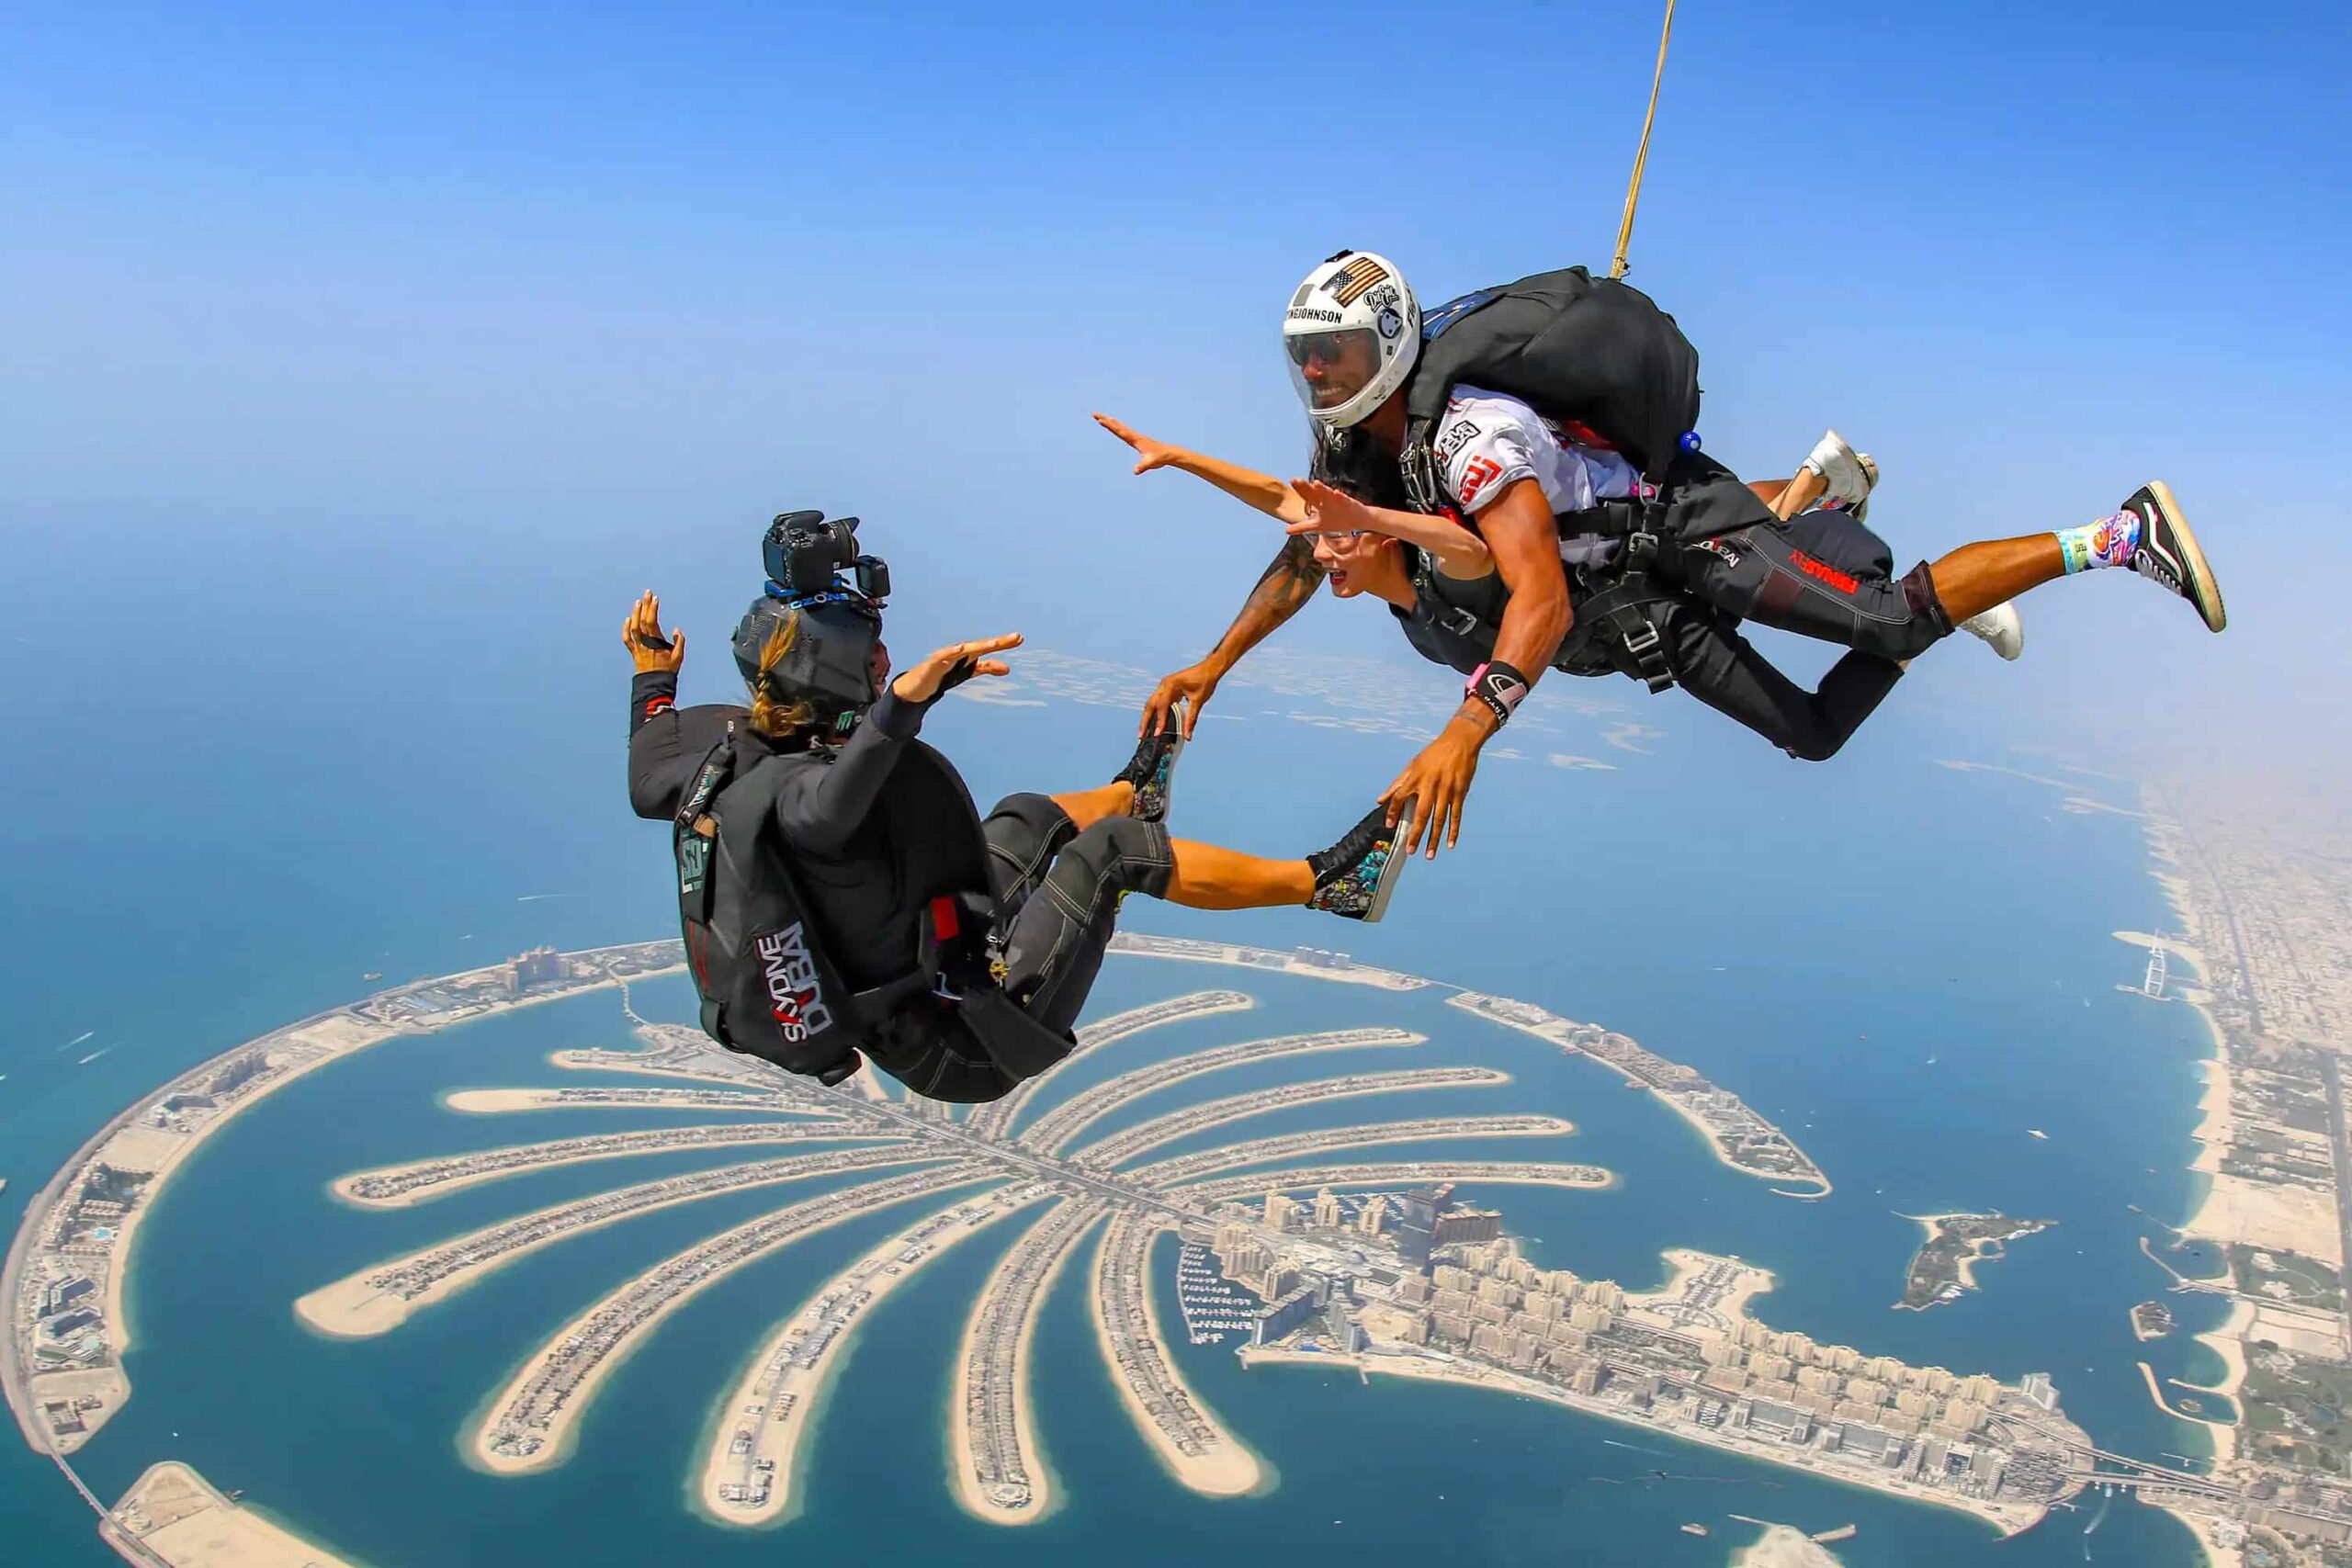 The Best Adventure Activities In Dubai - Top Attractions And Places To Visit